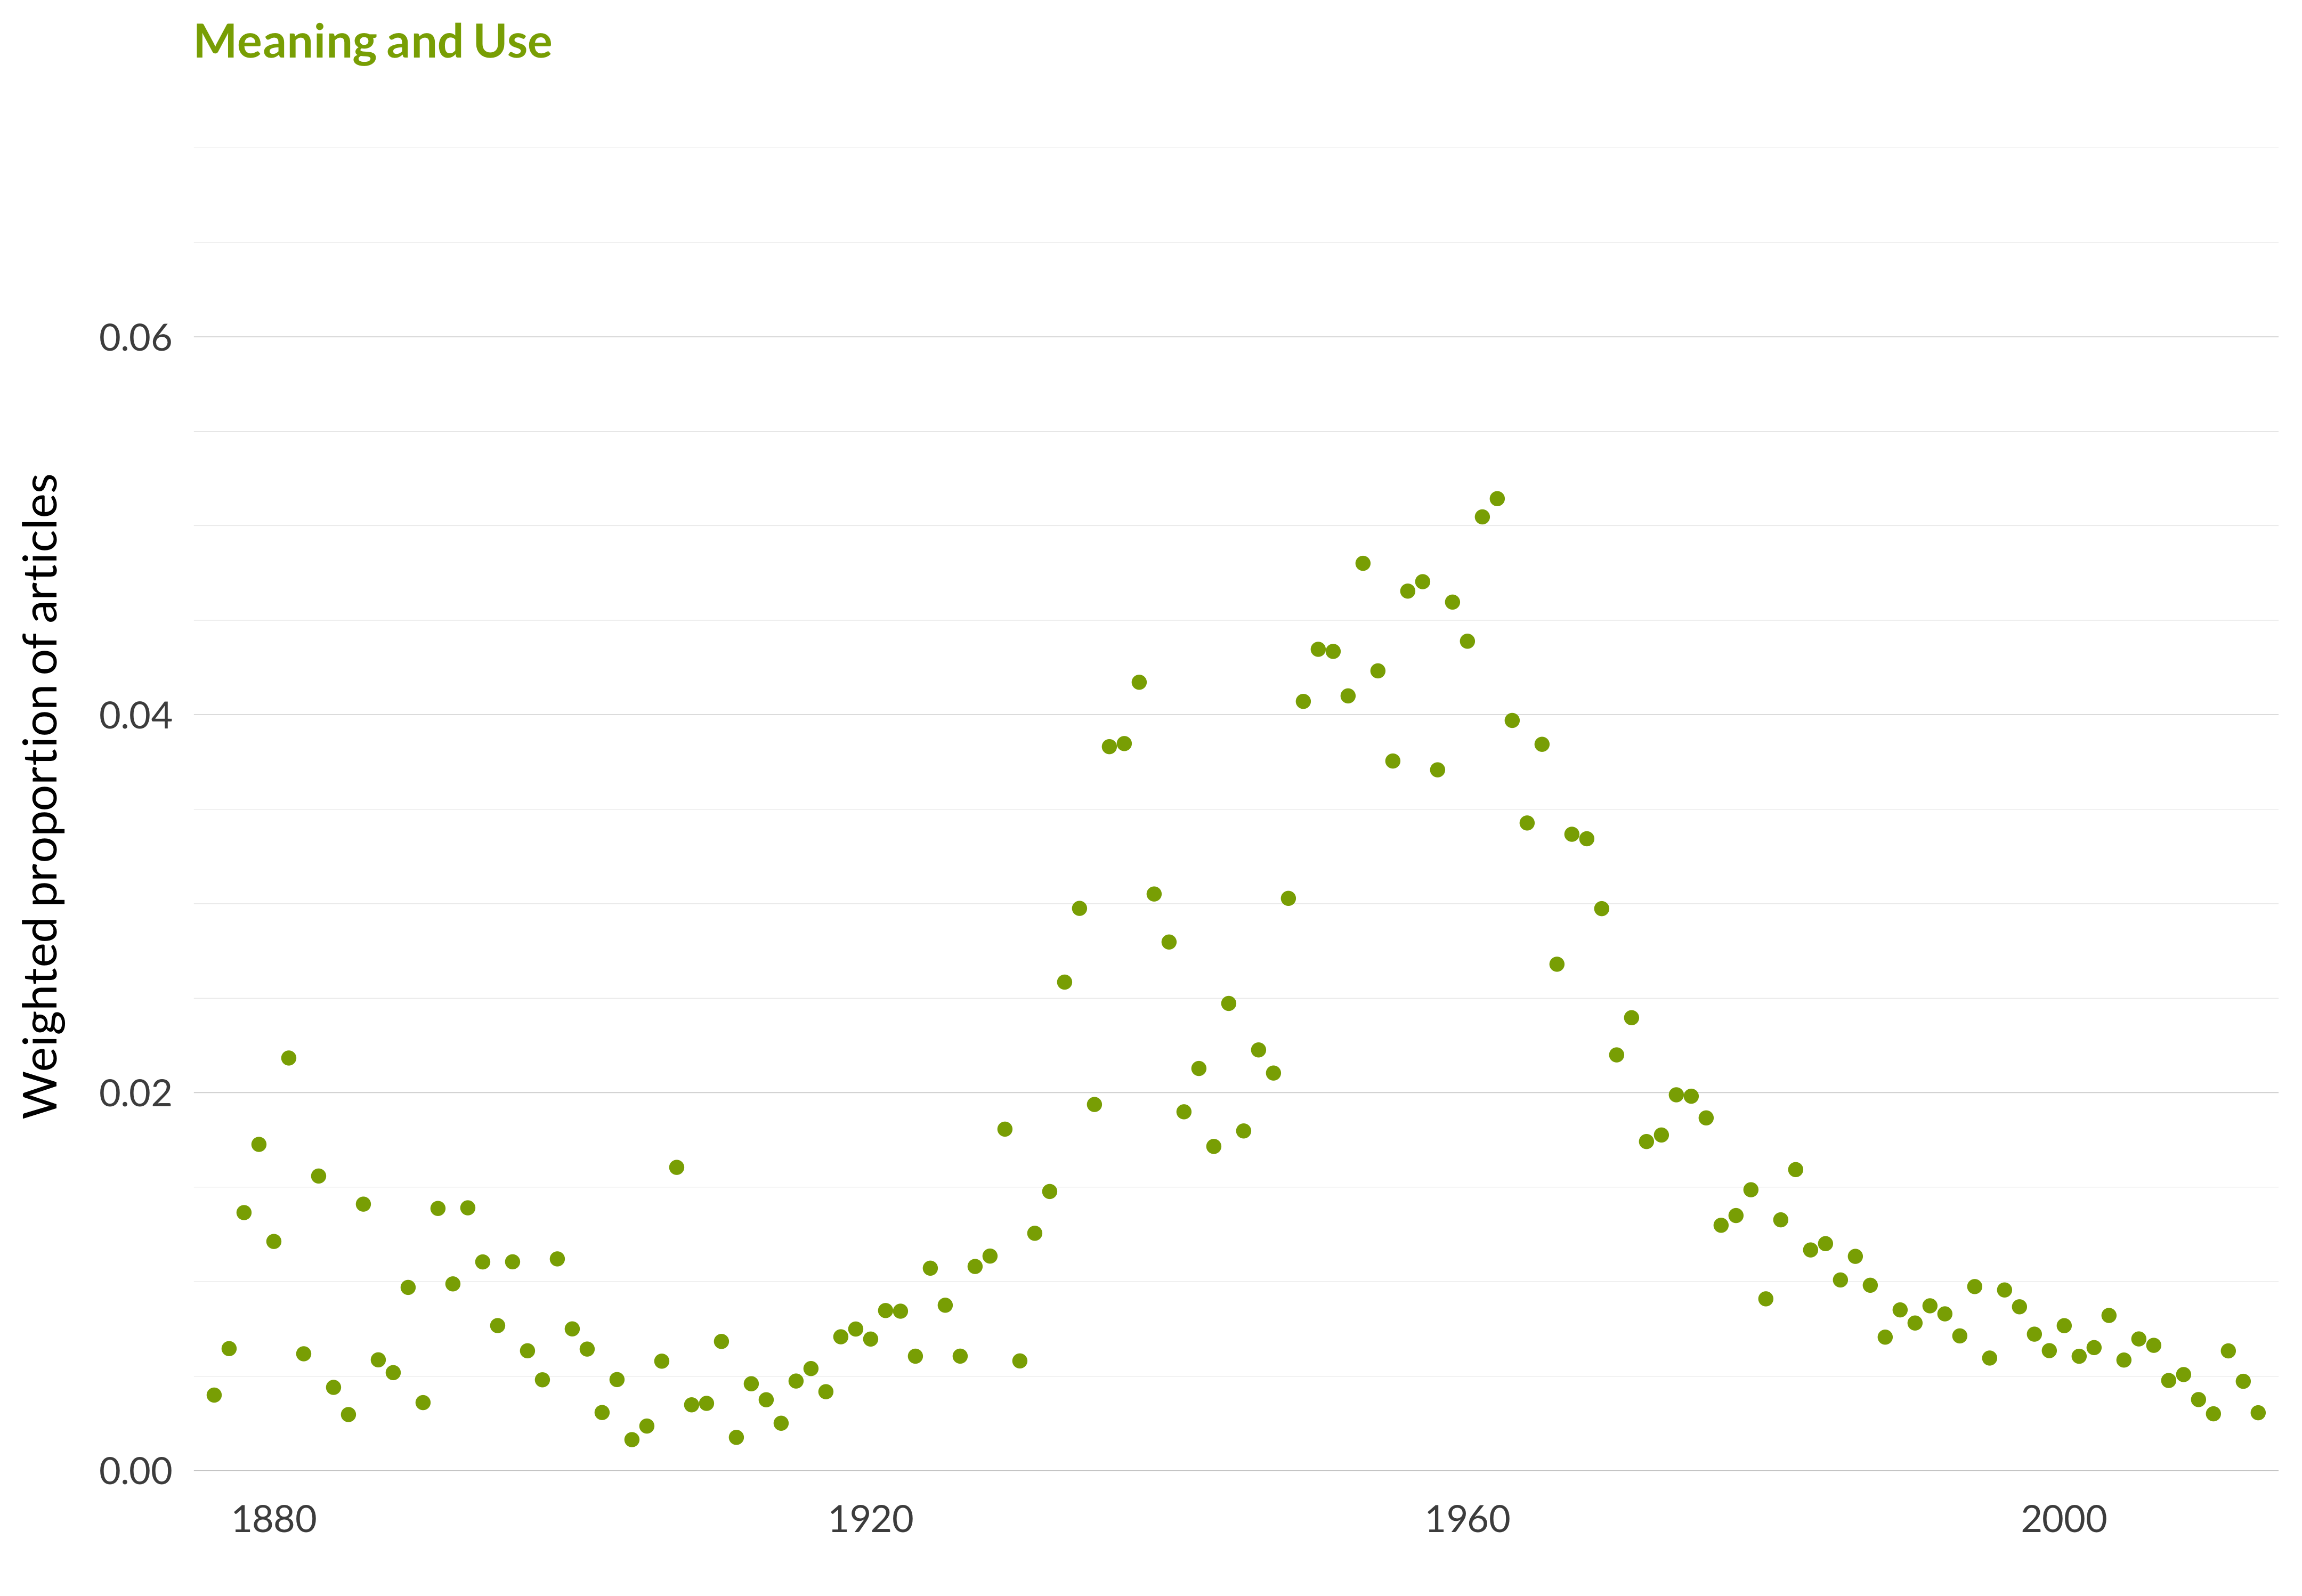 A scatterplot showing which proportion of articles each year are in the meaning and usetopic. The x-axis shows the year, the y-axis measures the proportion of articles each year in this topic. There is one dot per year. The highest value is in 1962 when 5.1% of articles were in this topic. The lowest value is in 1904 when 0.2% of articles were in this topic. The full table that provides the data for this graph is available in Table A.22 in Appendix A.